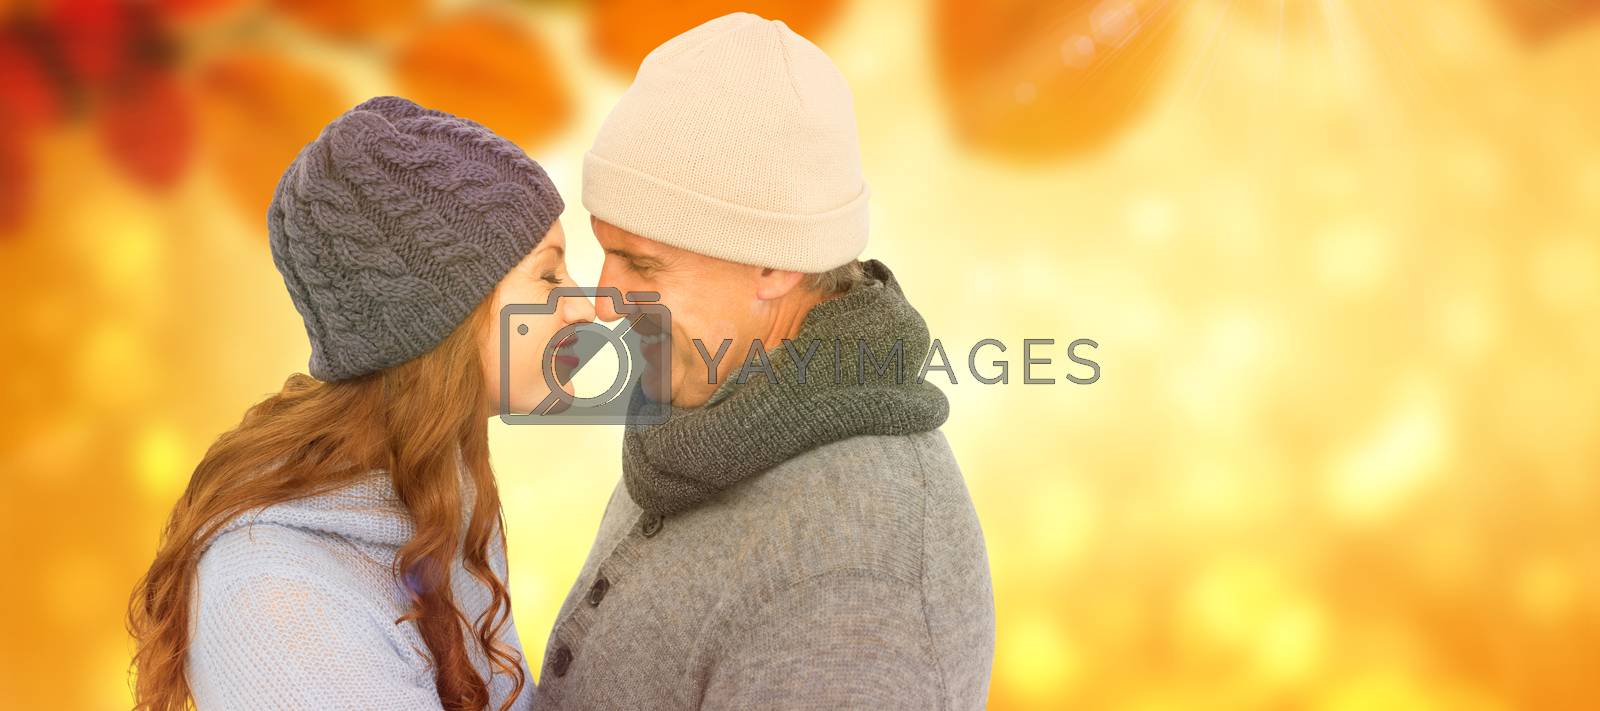 Royalty free image of Composite image of couple in warm clothing facing each other by Wavebreakmedia